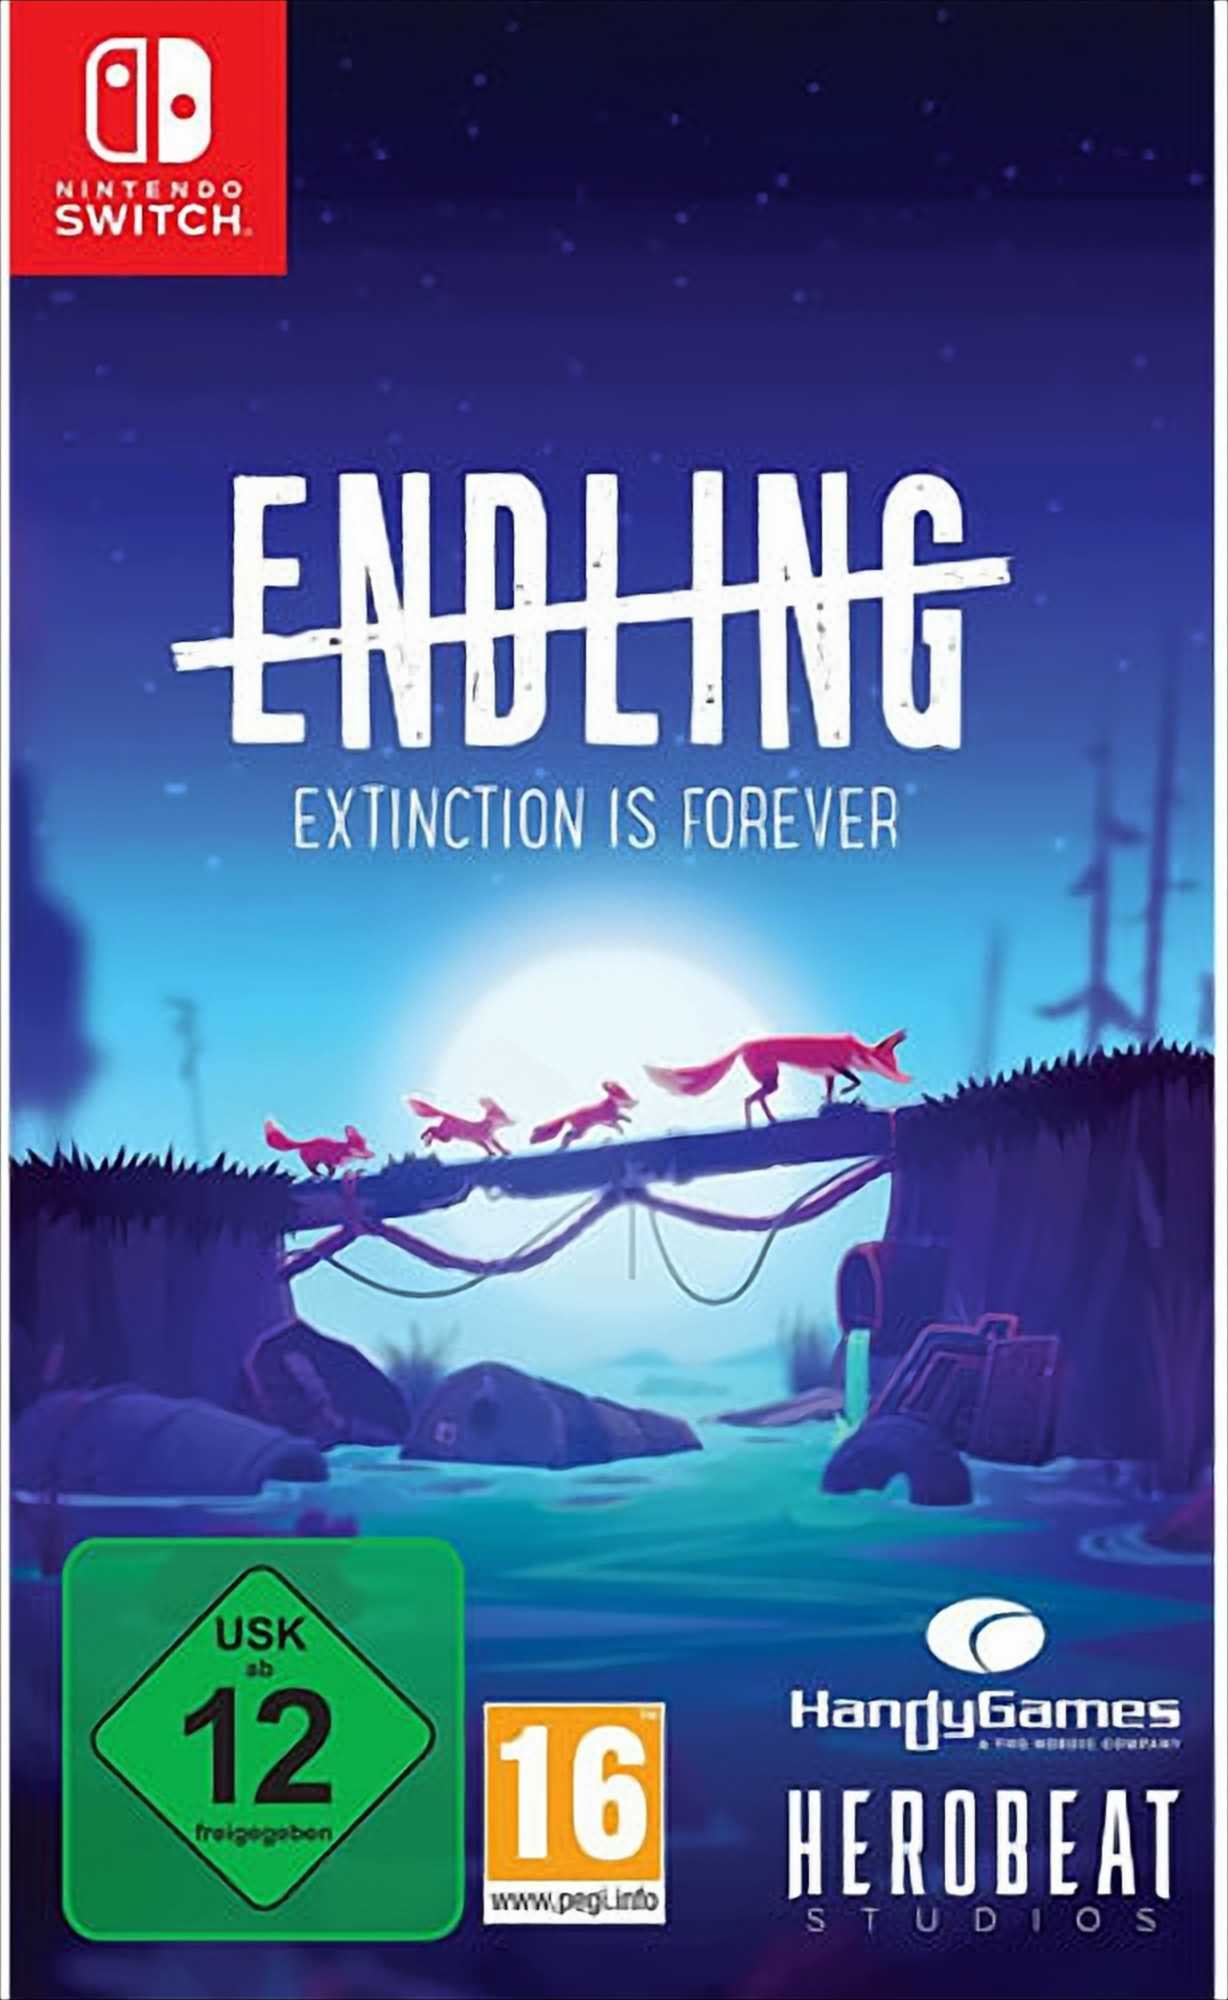 Endling - Extinction is for Switch] SWITCH [Nintendo - ever